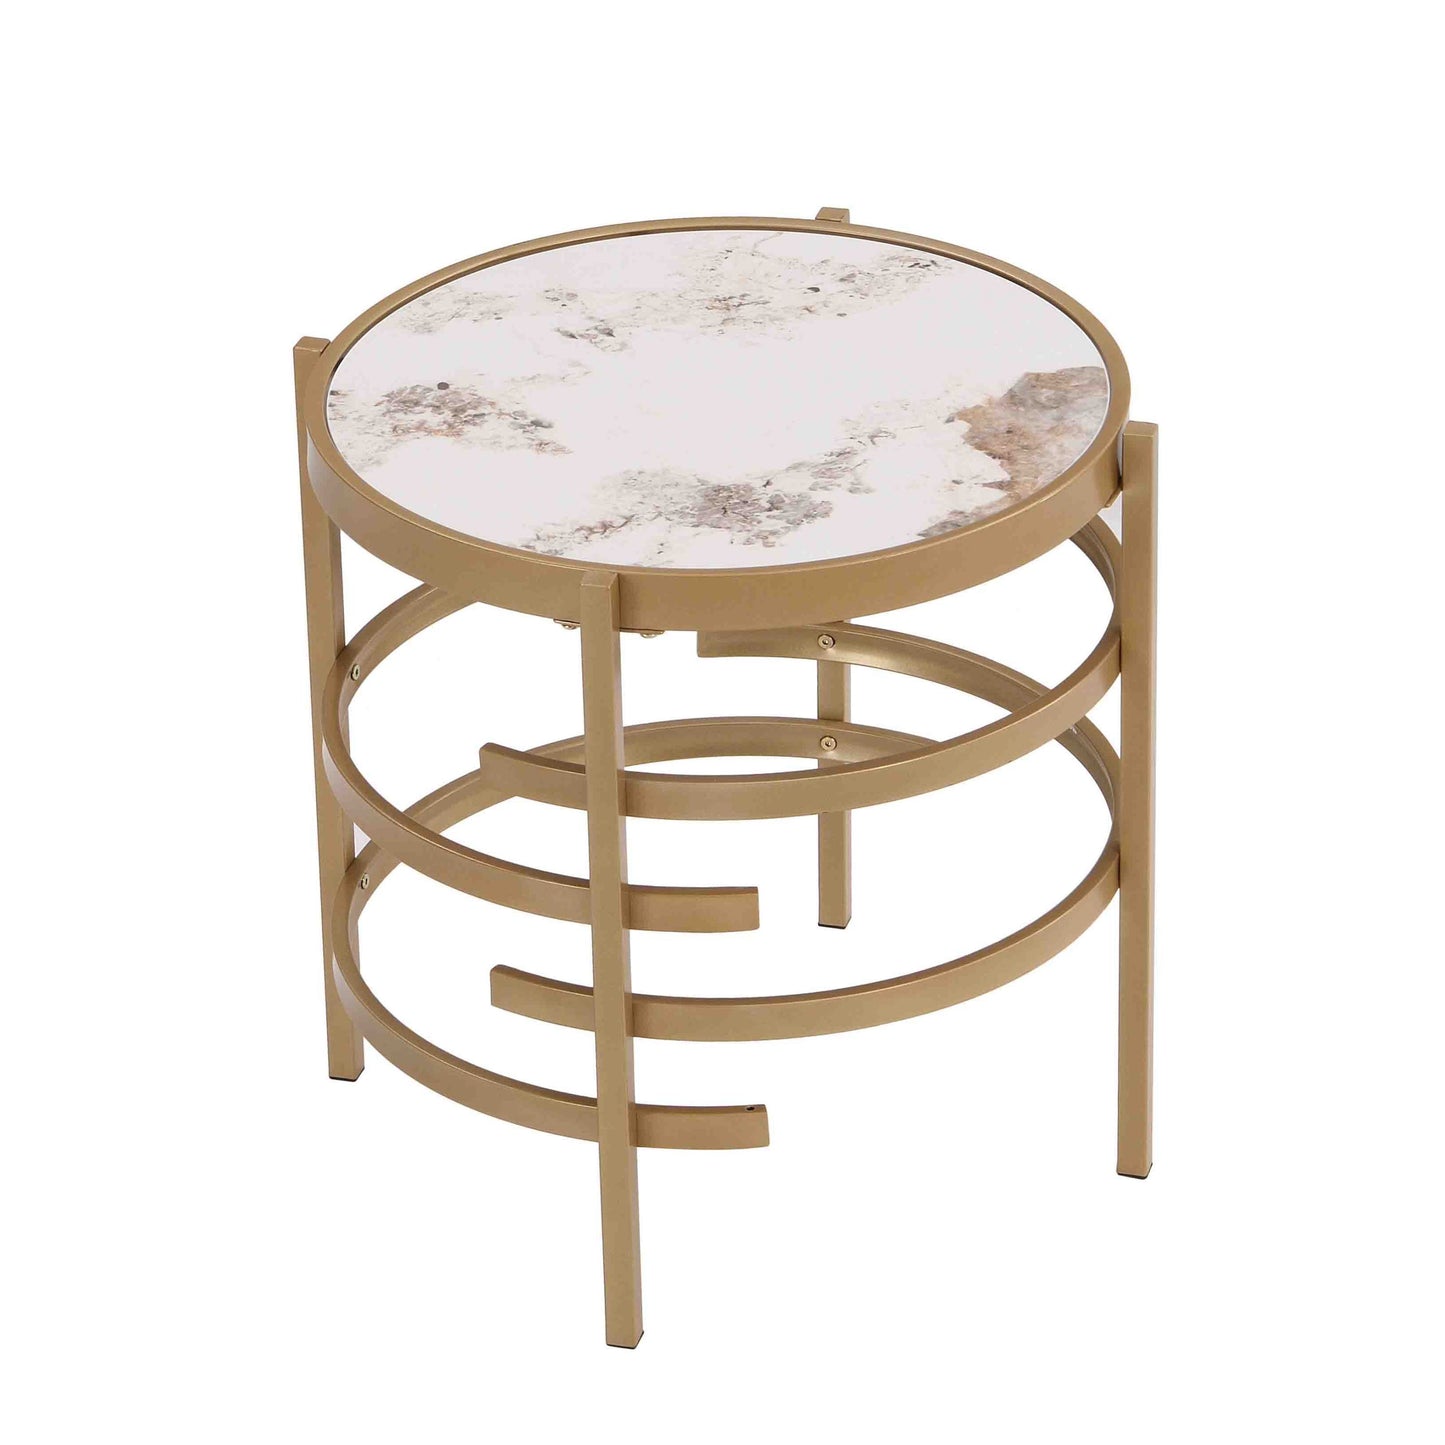 Modern Side Table, Pandora Sintered Stone End Table, Golden Small Coffee Table,  20.67''W x 20.67''D x 21.65'H - Enova Luxe Home Store